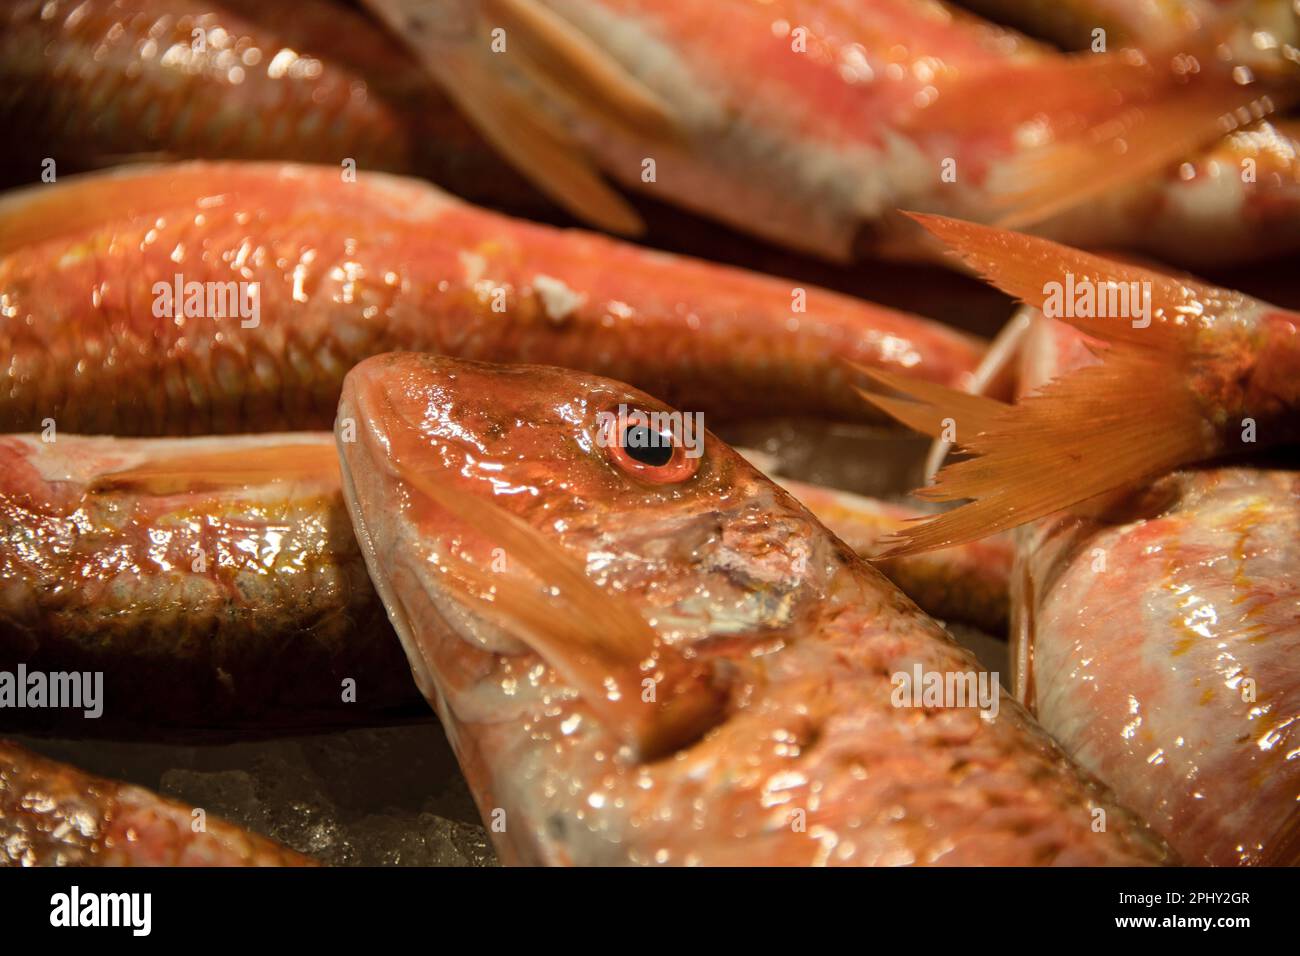 red mullet, plain red mullet (Mullus barbatus), freshly caught red mullets at a fish market, Italy, Venice Stock Photo